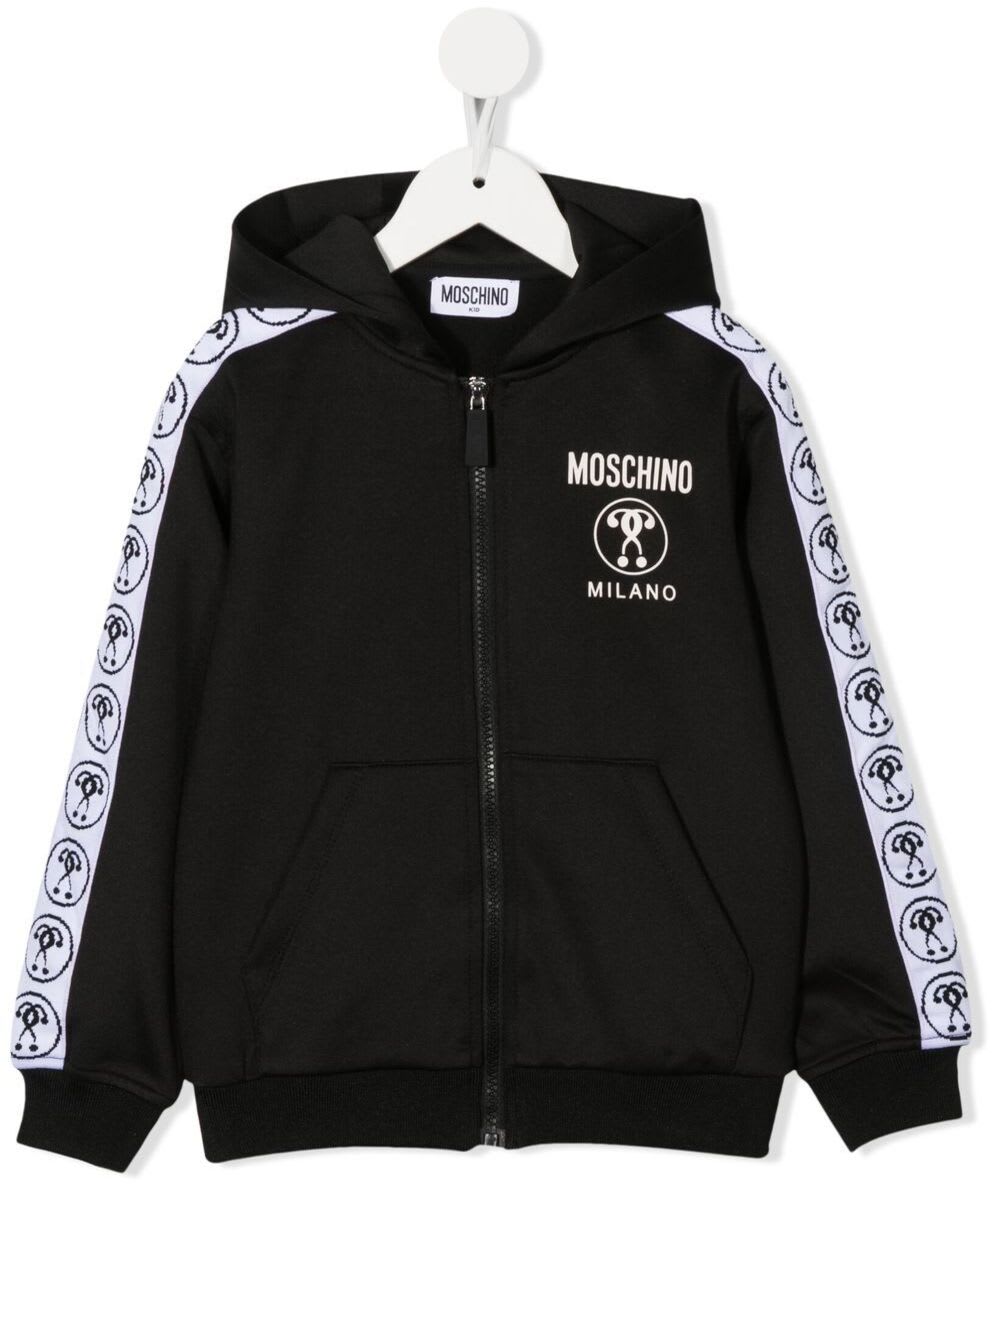 Moschino Black And White Zip Sweatshirt In Polyester With Double Question Mark Logo On The Band Sewn On The Sleeves